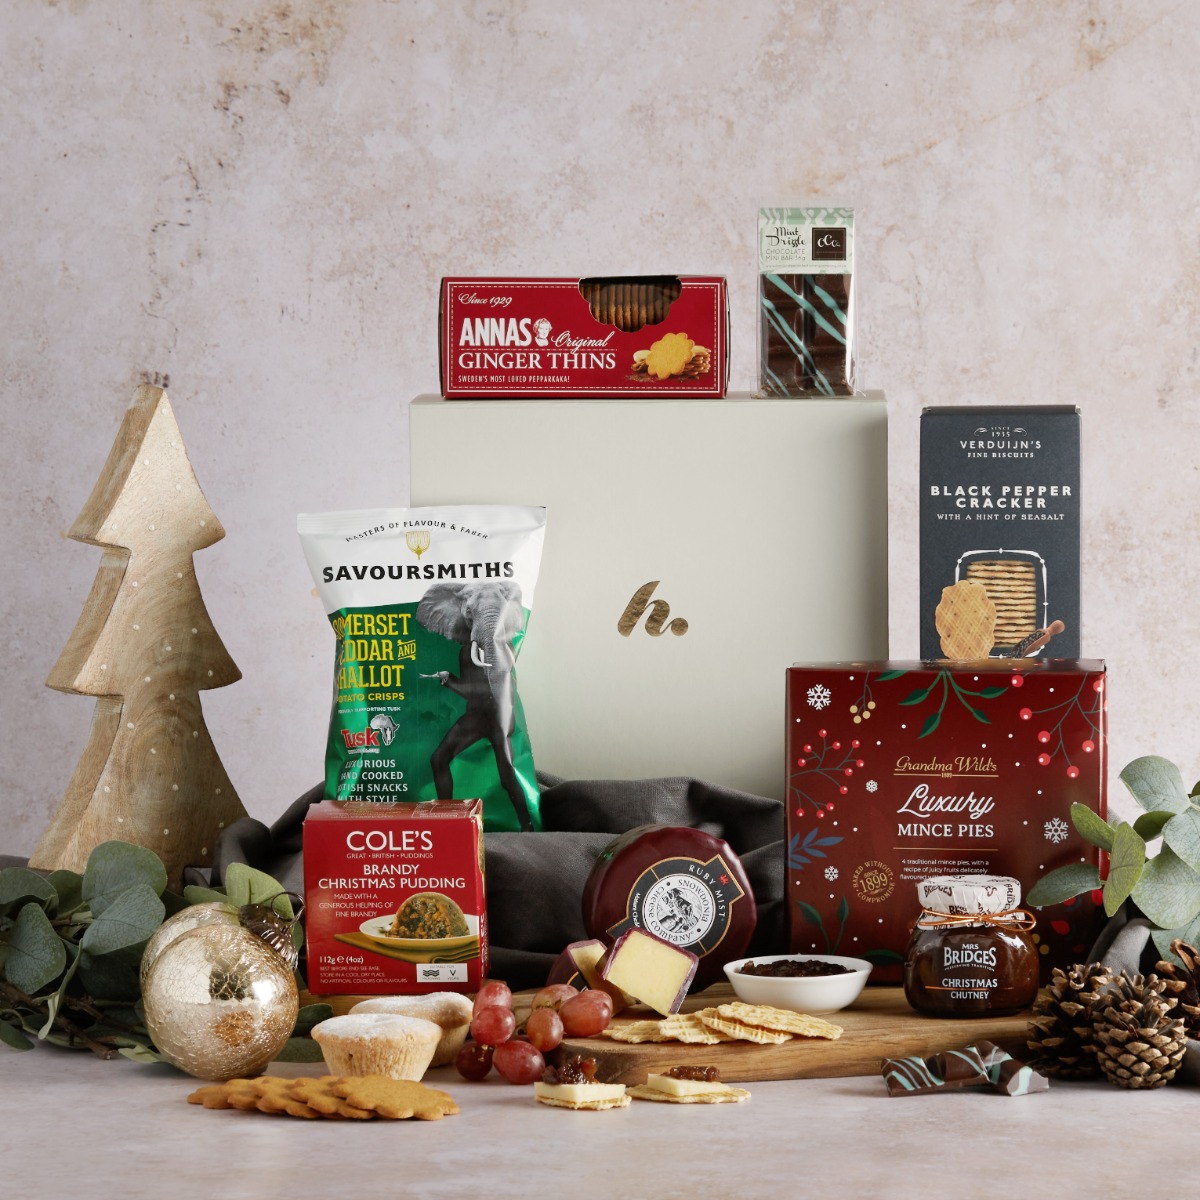 The Christmas Season Selection Gift Box with contents on display and a Christmas decoration